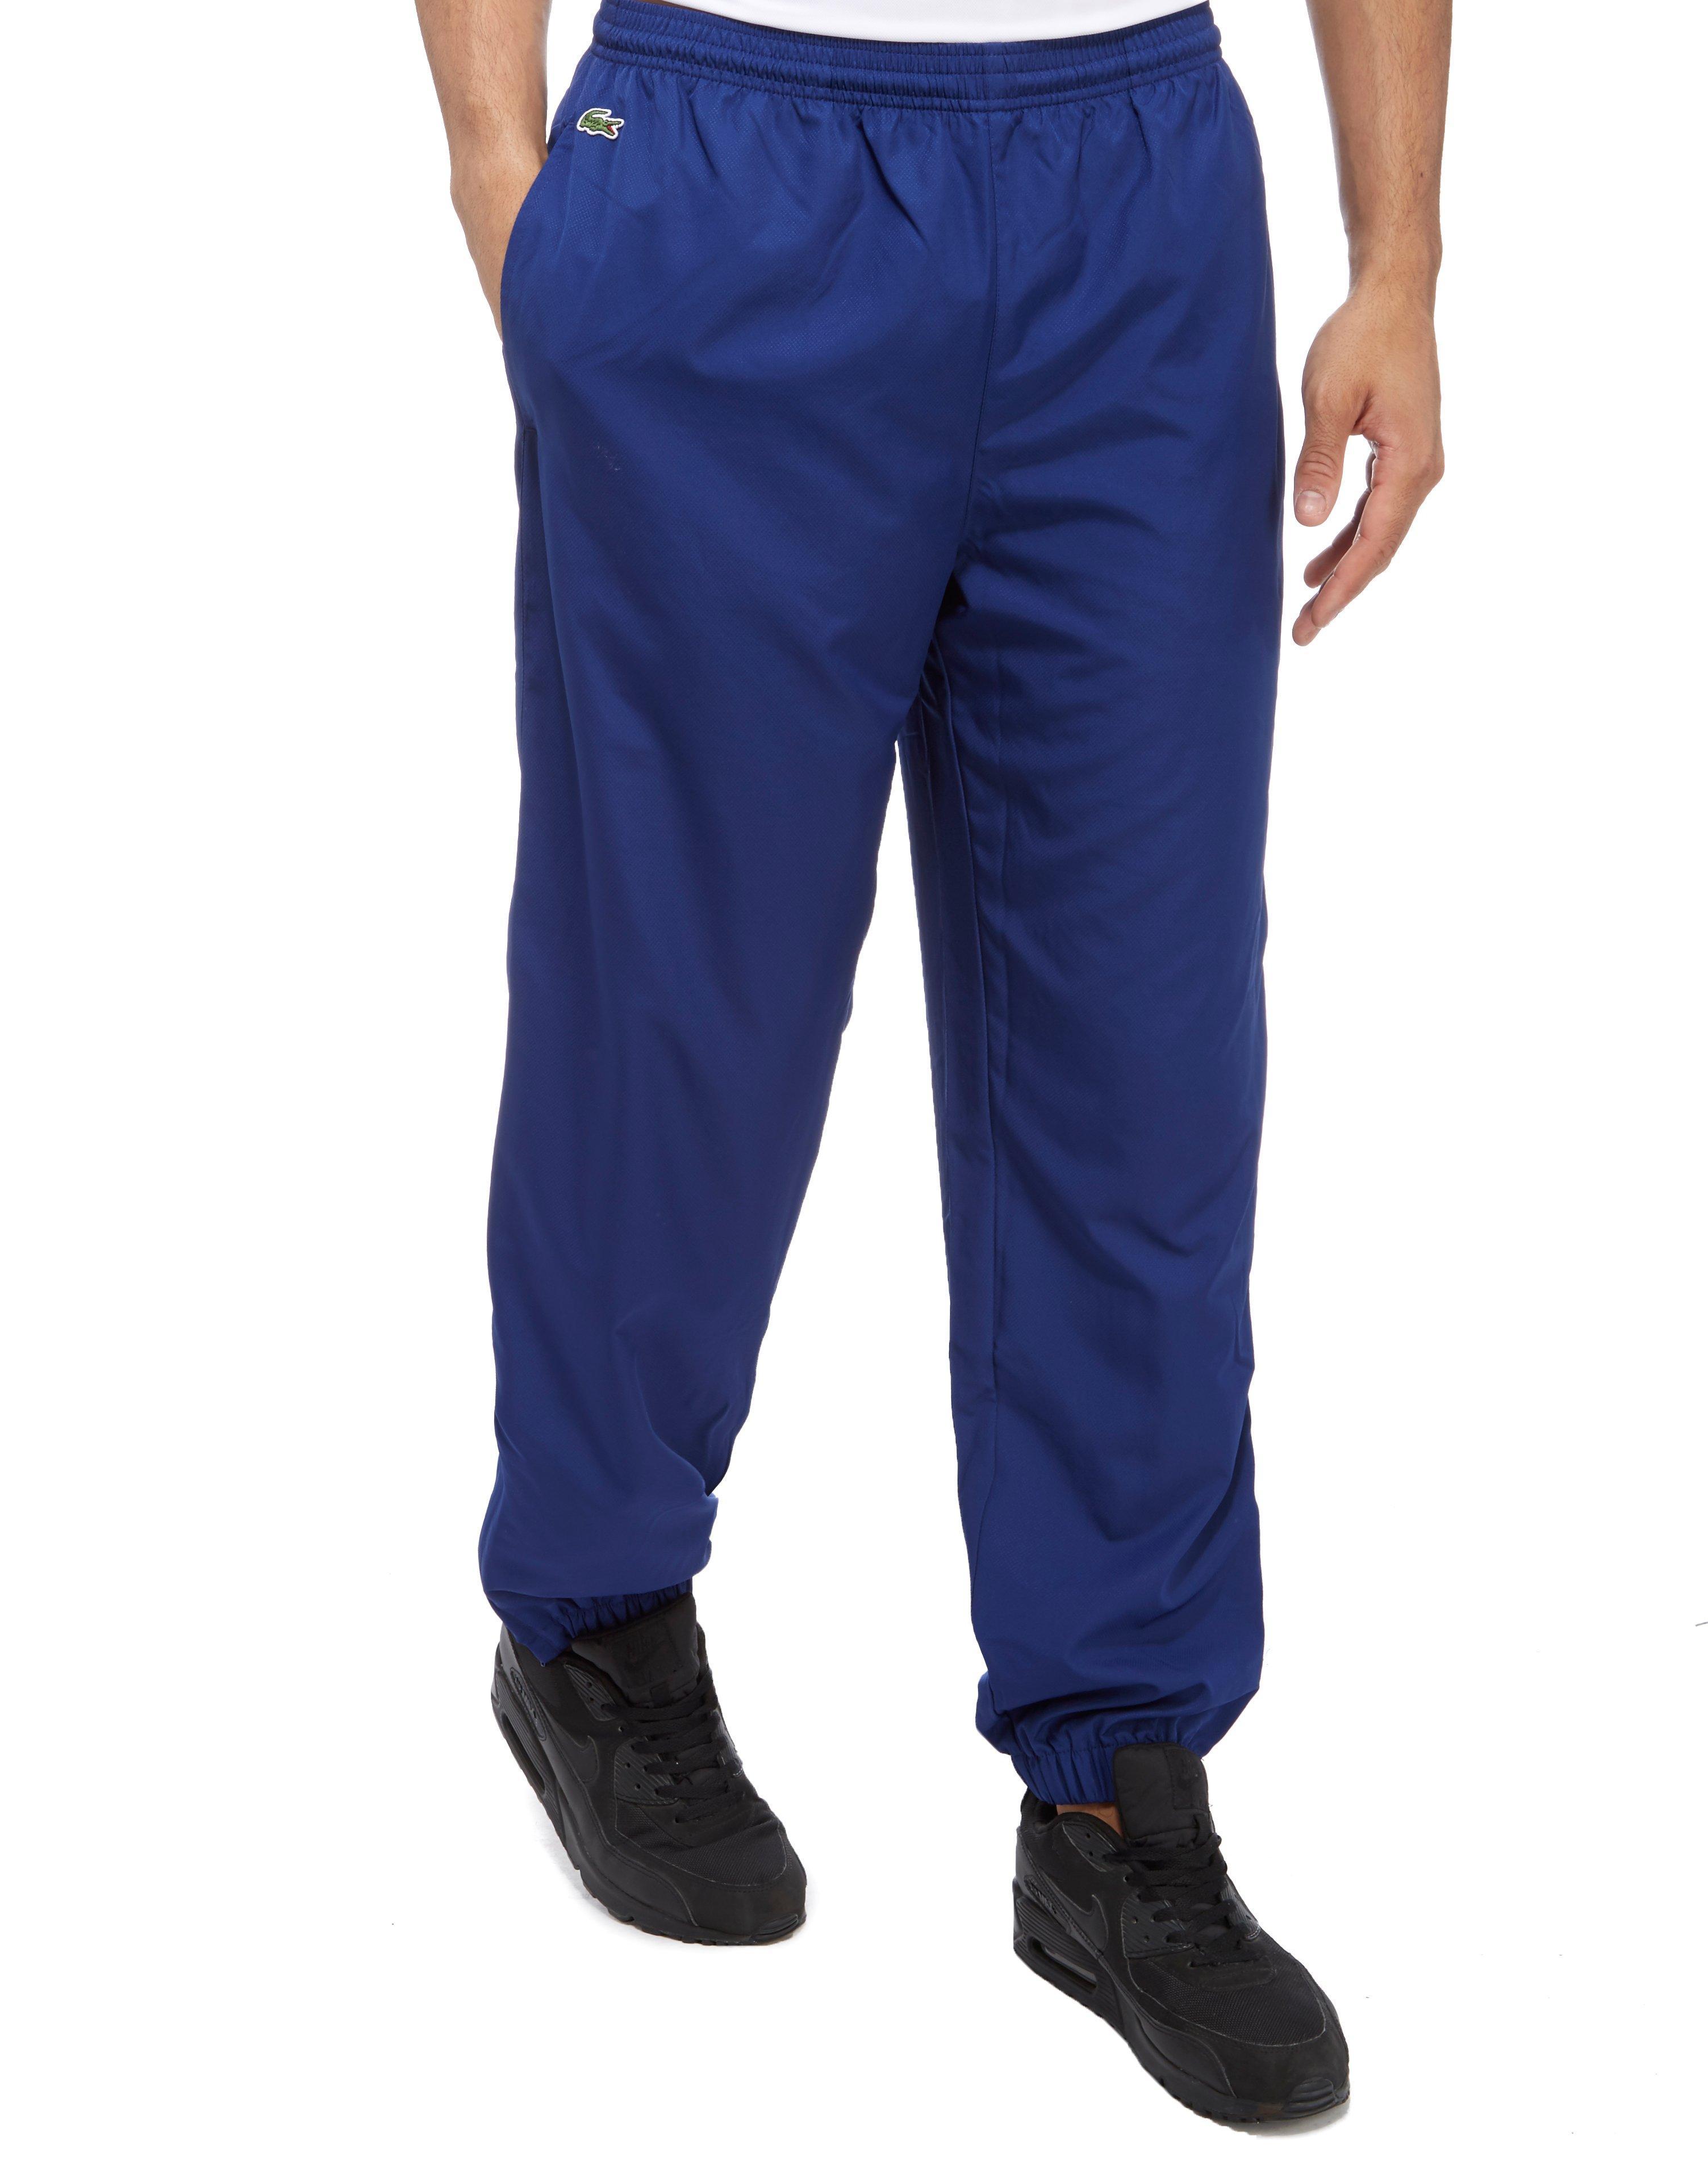 Lacoste Synthetic Guppy Track Pants in Blue for Men - Lyst